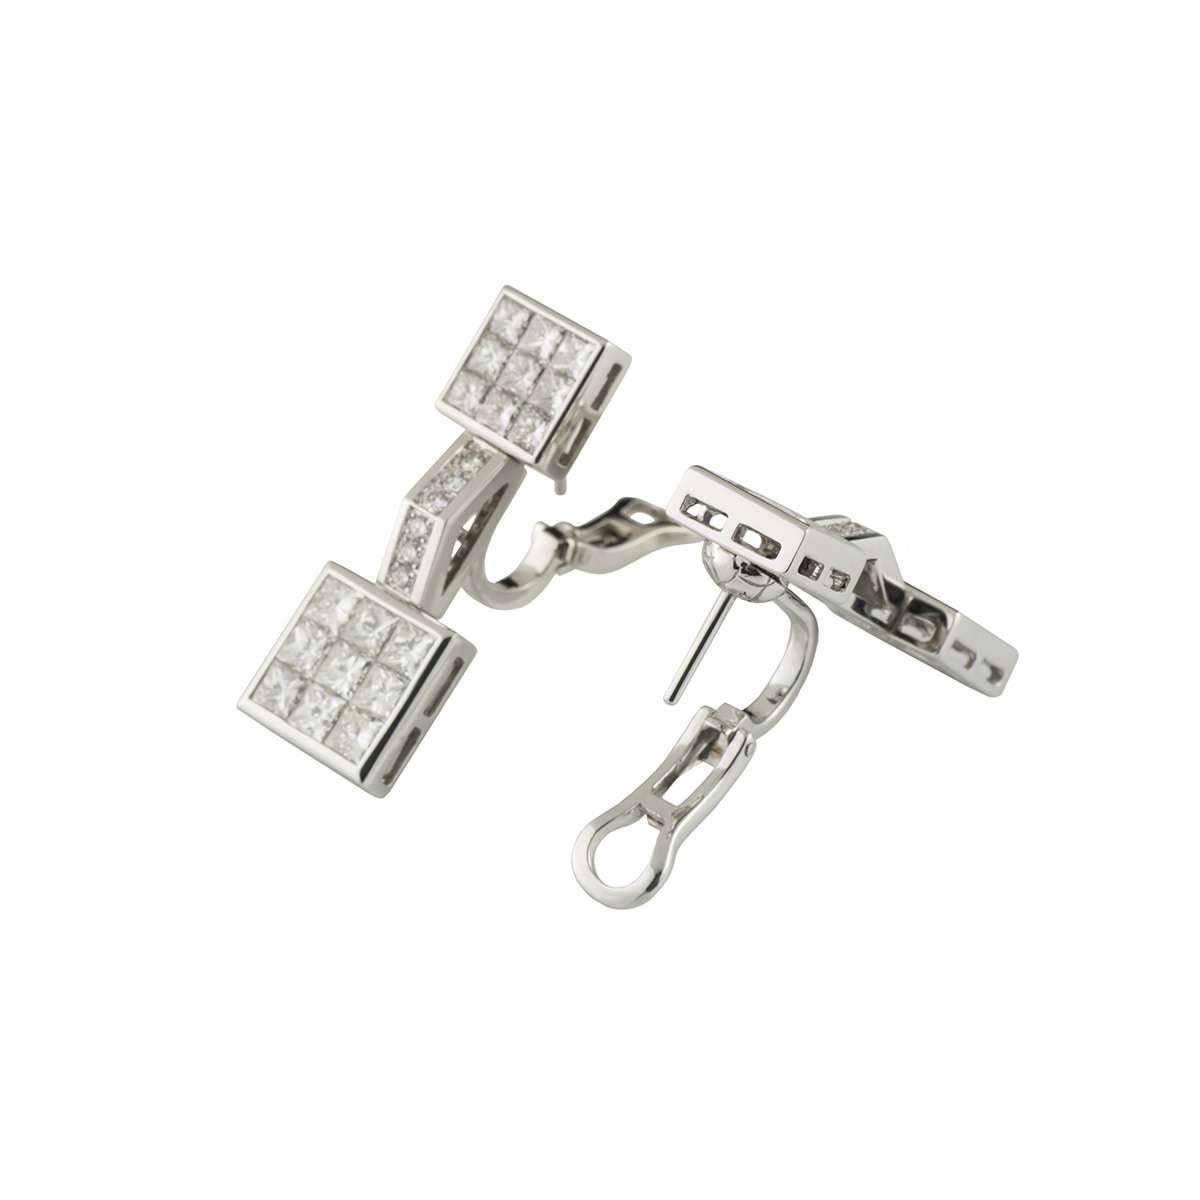 A sparkly pair of 18k white gold diamond earrings by Mouawad. Each earring comprise of 2 square motifs with a bar connecting the two. The square motifs have 9 princess cut diamonds in each and the bar features 6 round brilliant cut diamonds in a